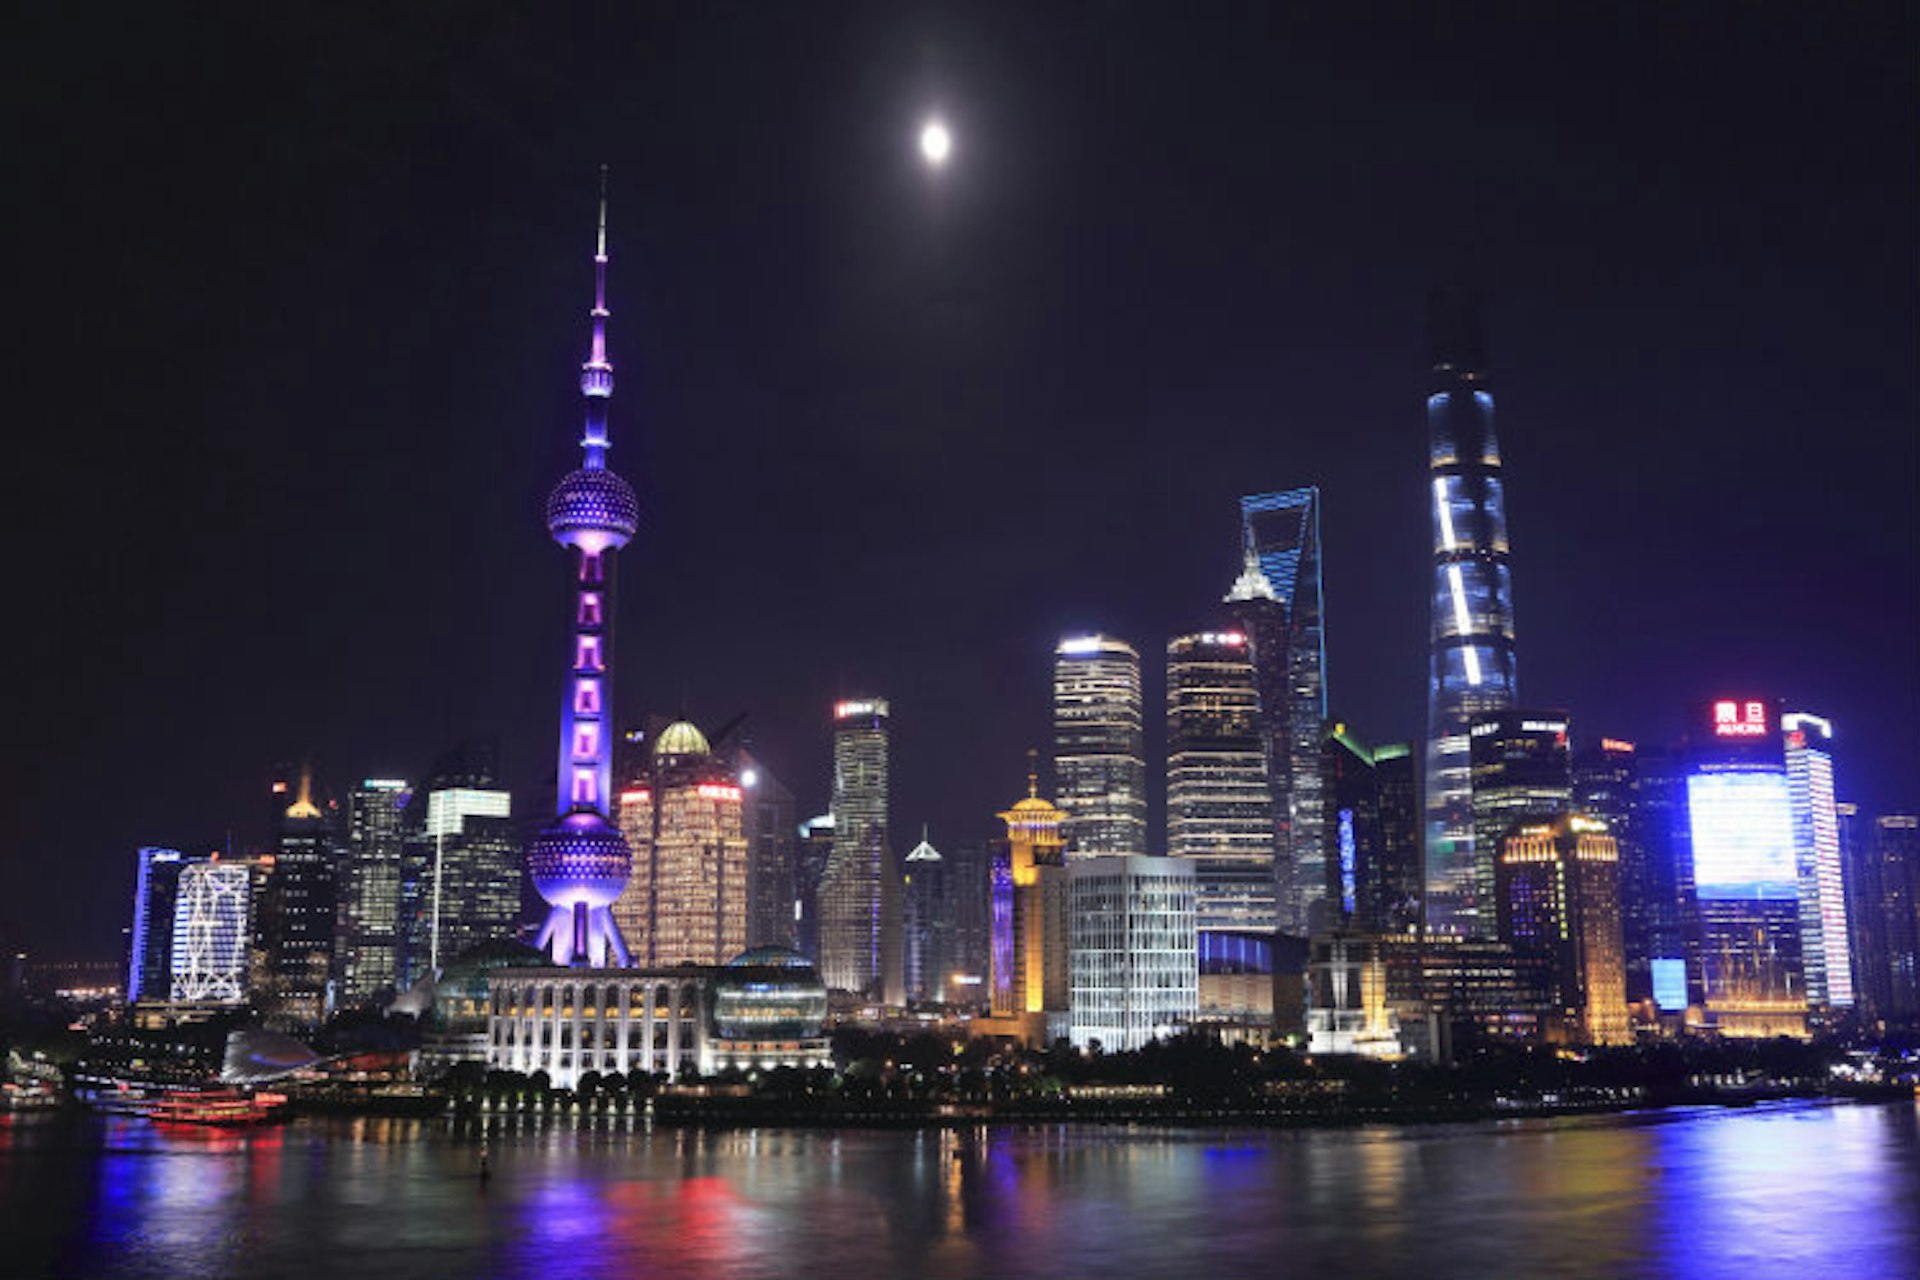 Nighttime skyline of the Pudong District, Shanghai, China.